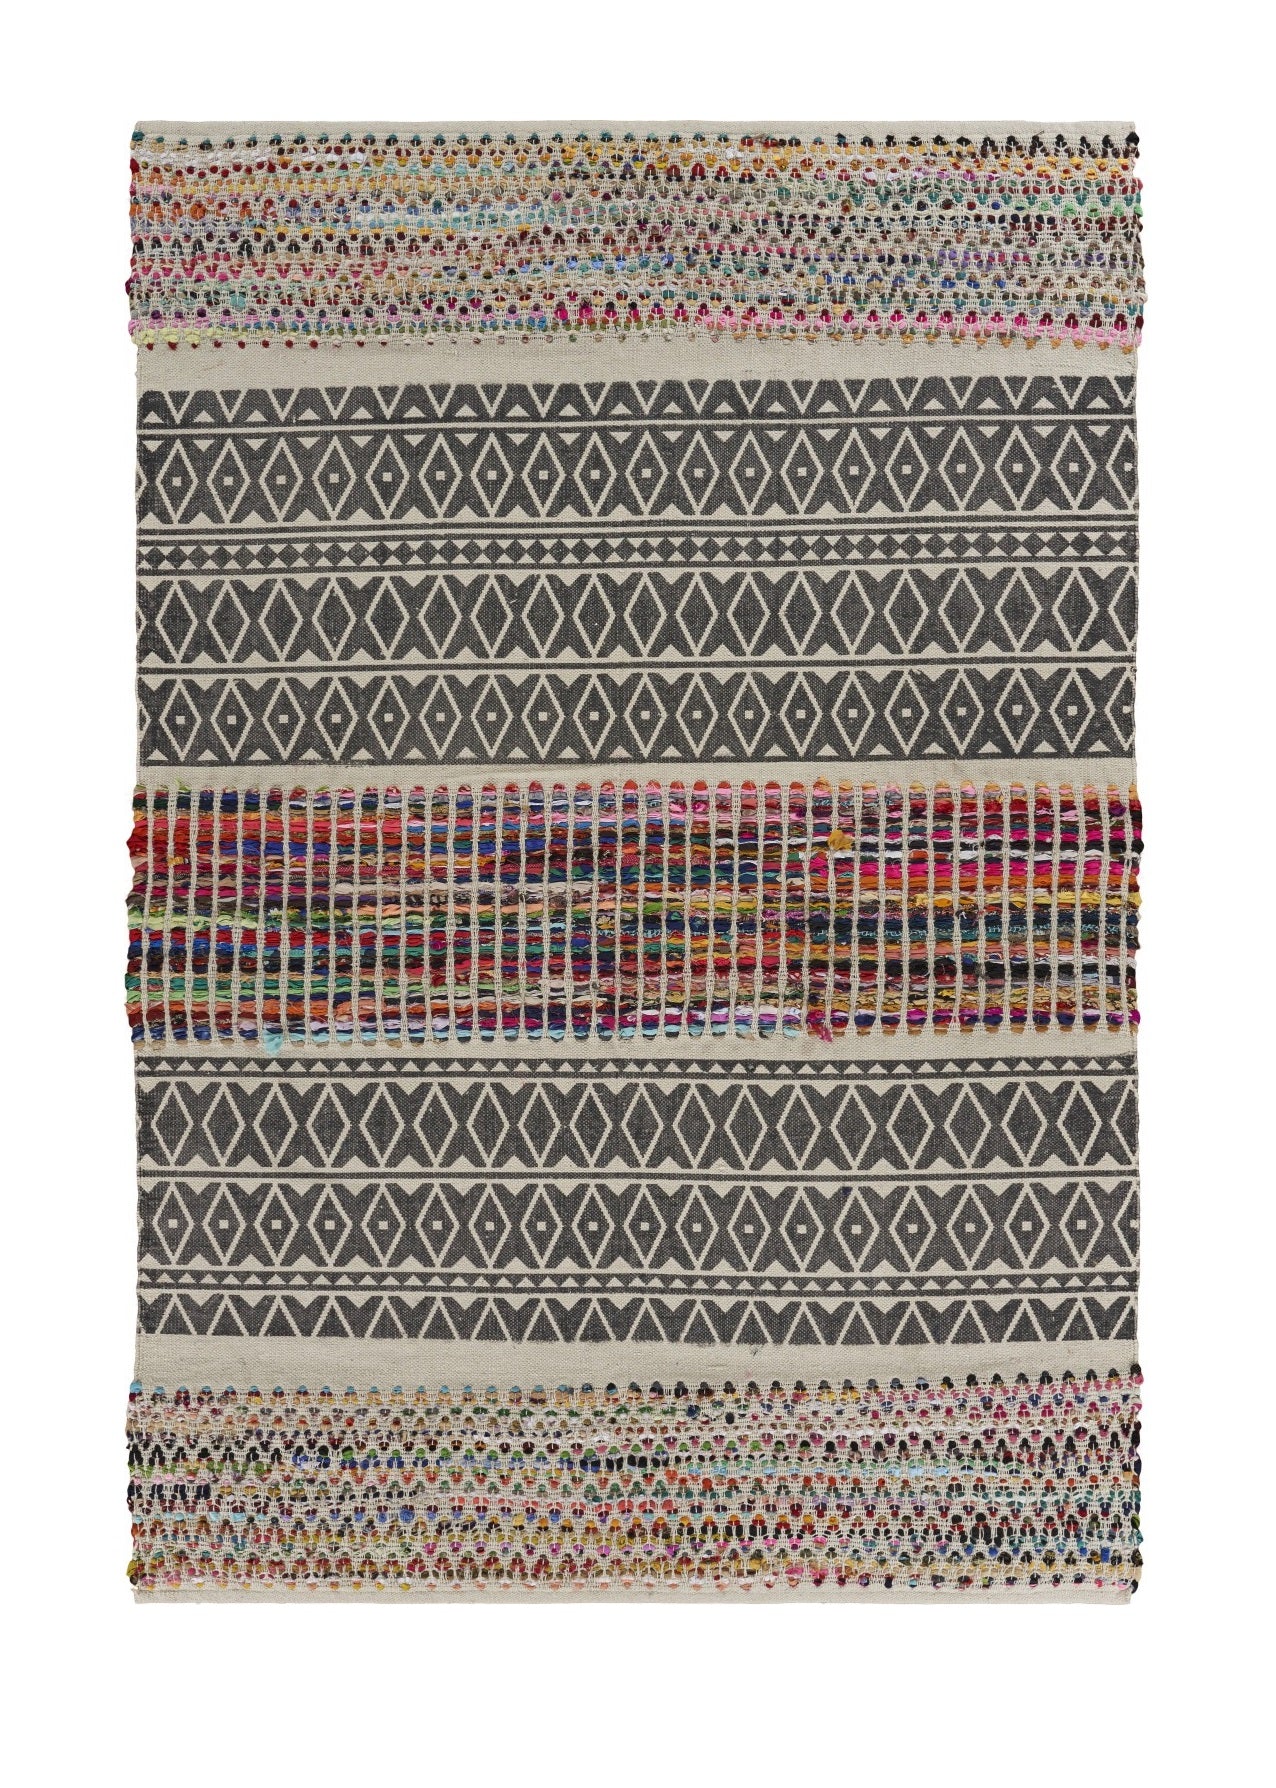 3’ x 5’ Colorful Traditional Chindi Area Rug